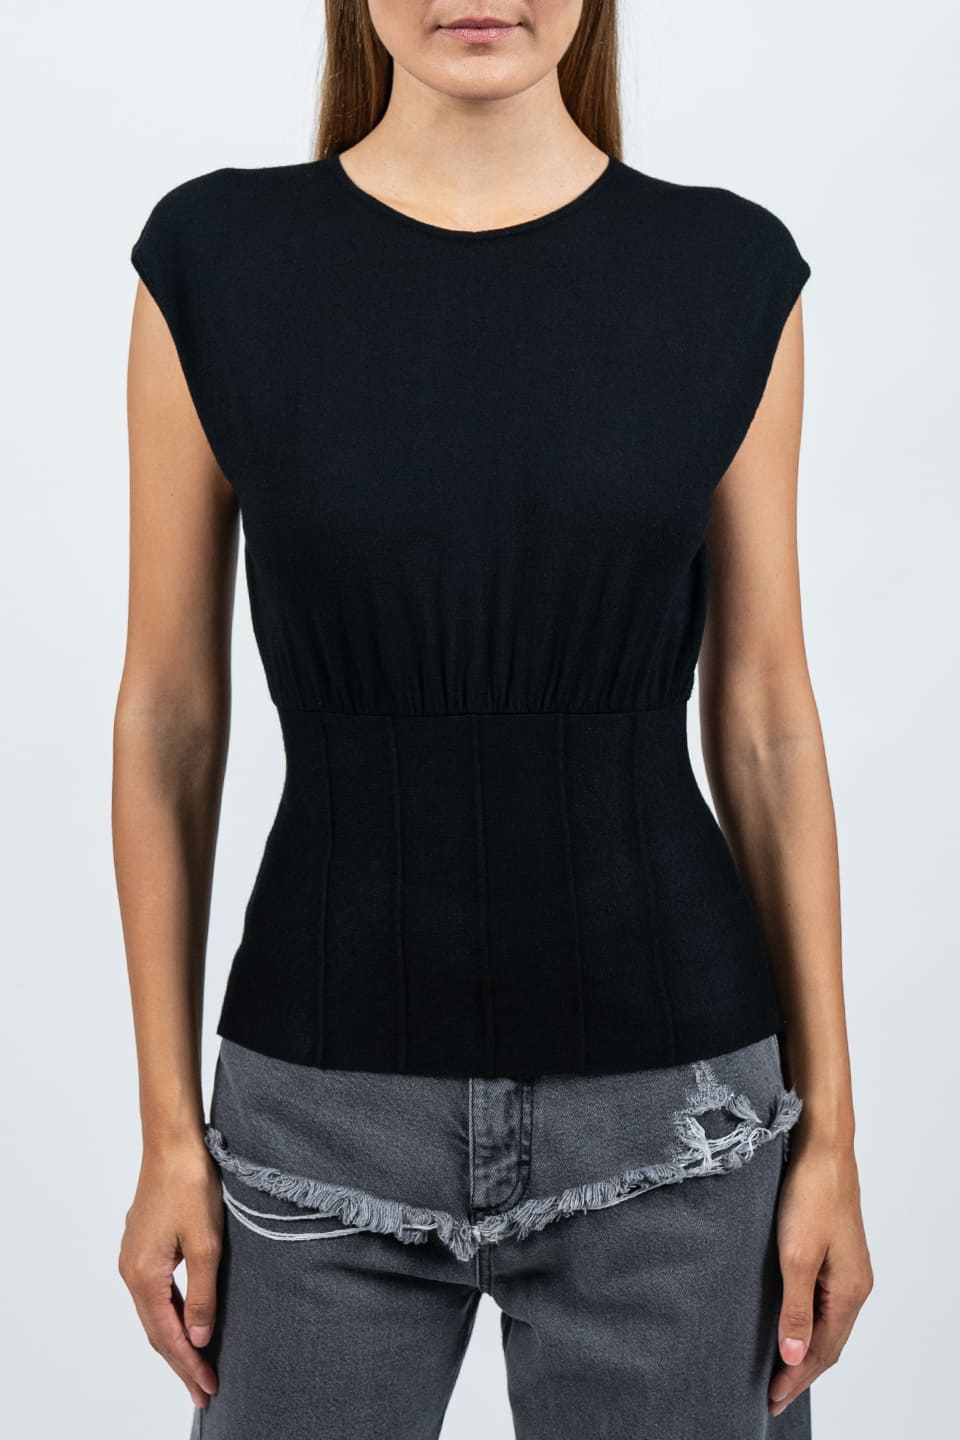 Shop online trendy Black Women short sleeve from Federica Tosi Fashion designer. Product gallery 1